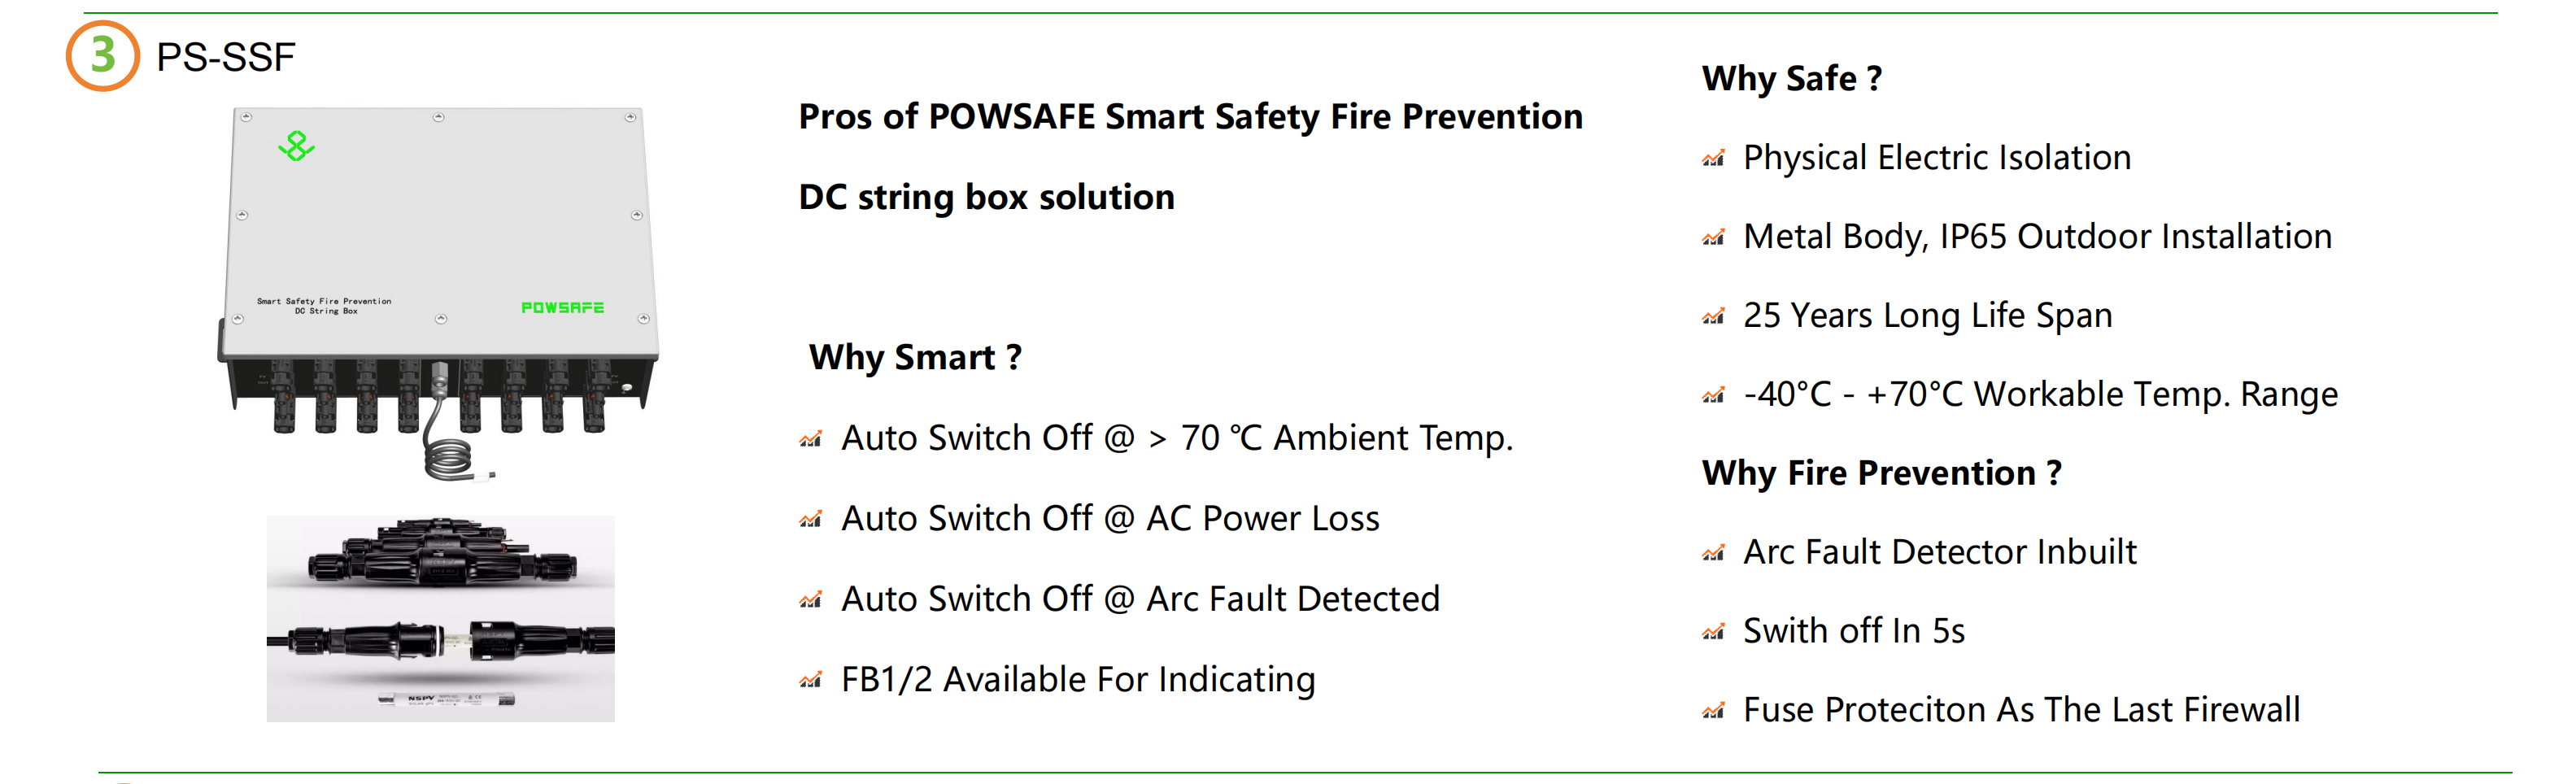 PV Safety Solution 2-1.png